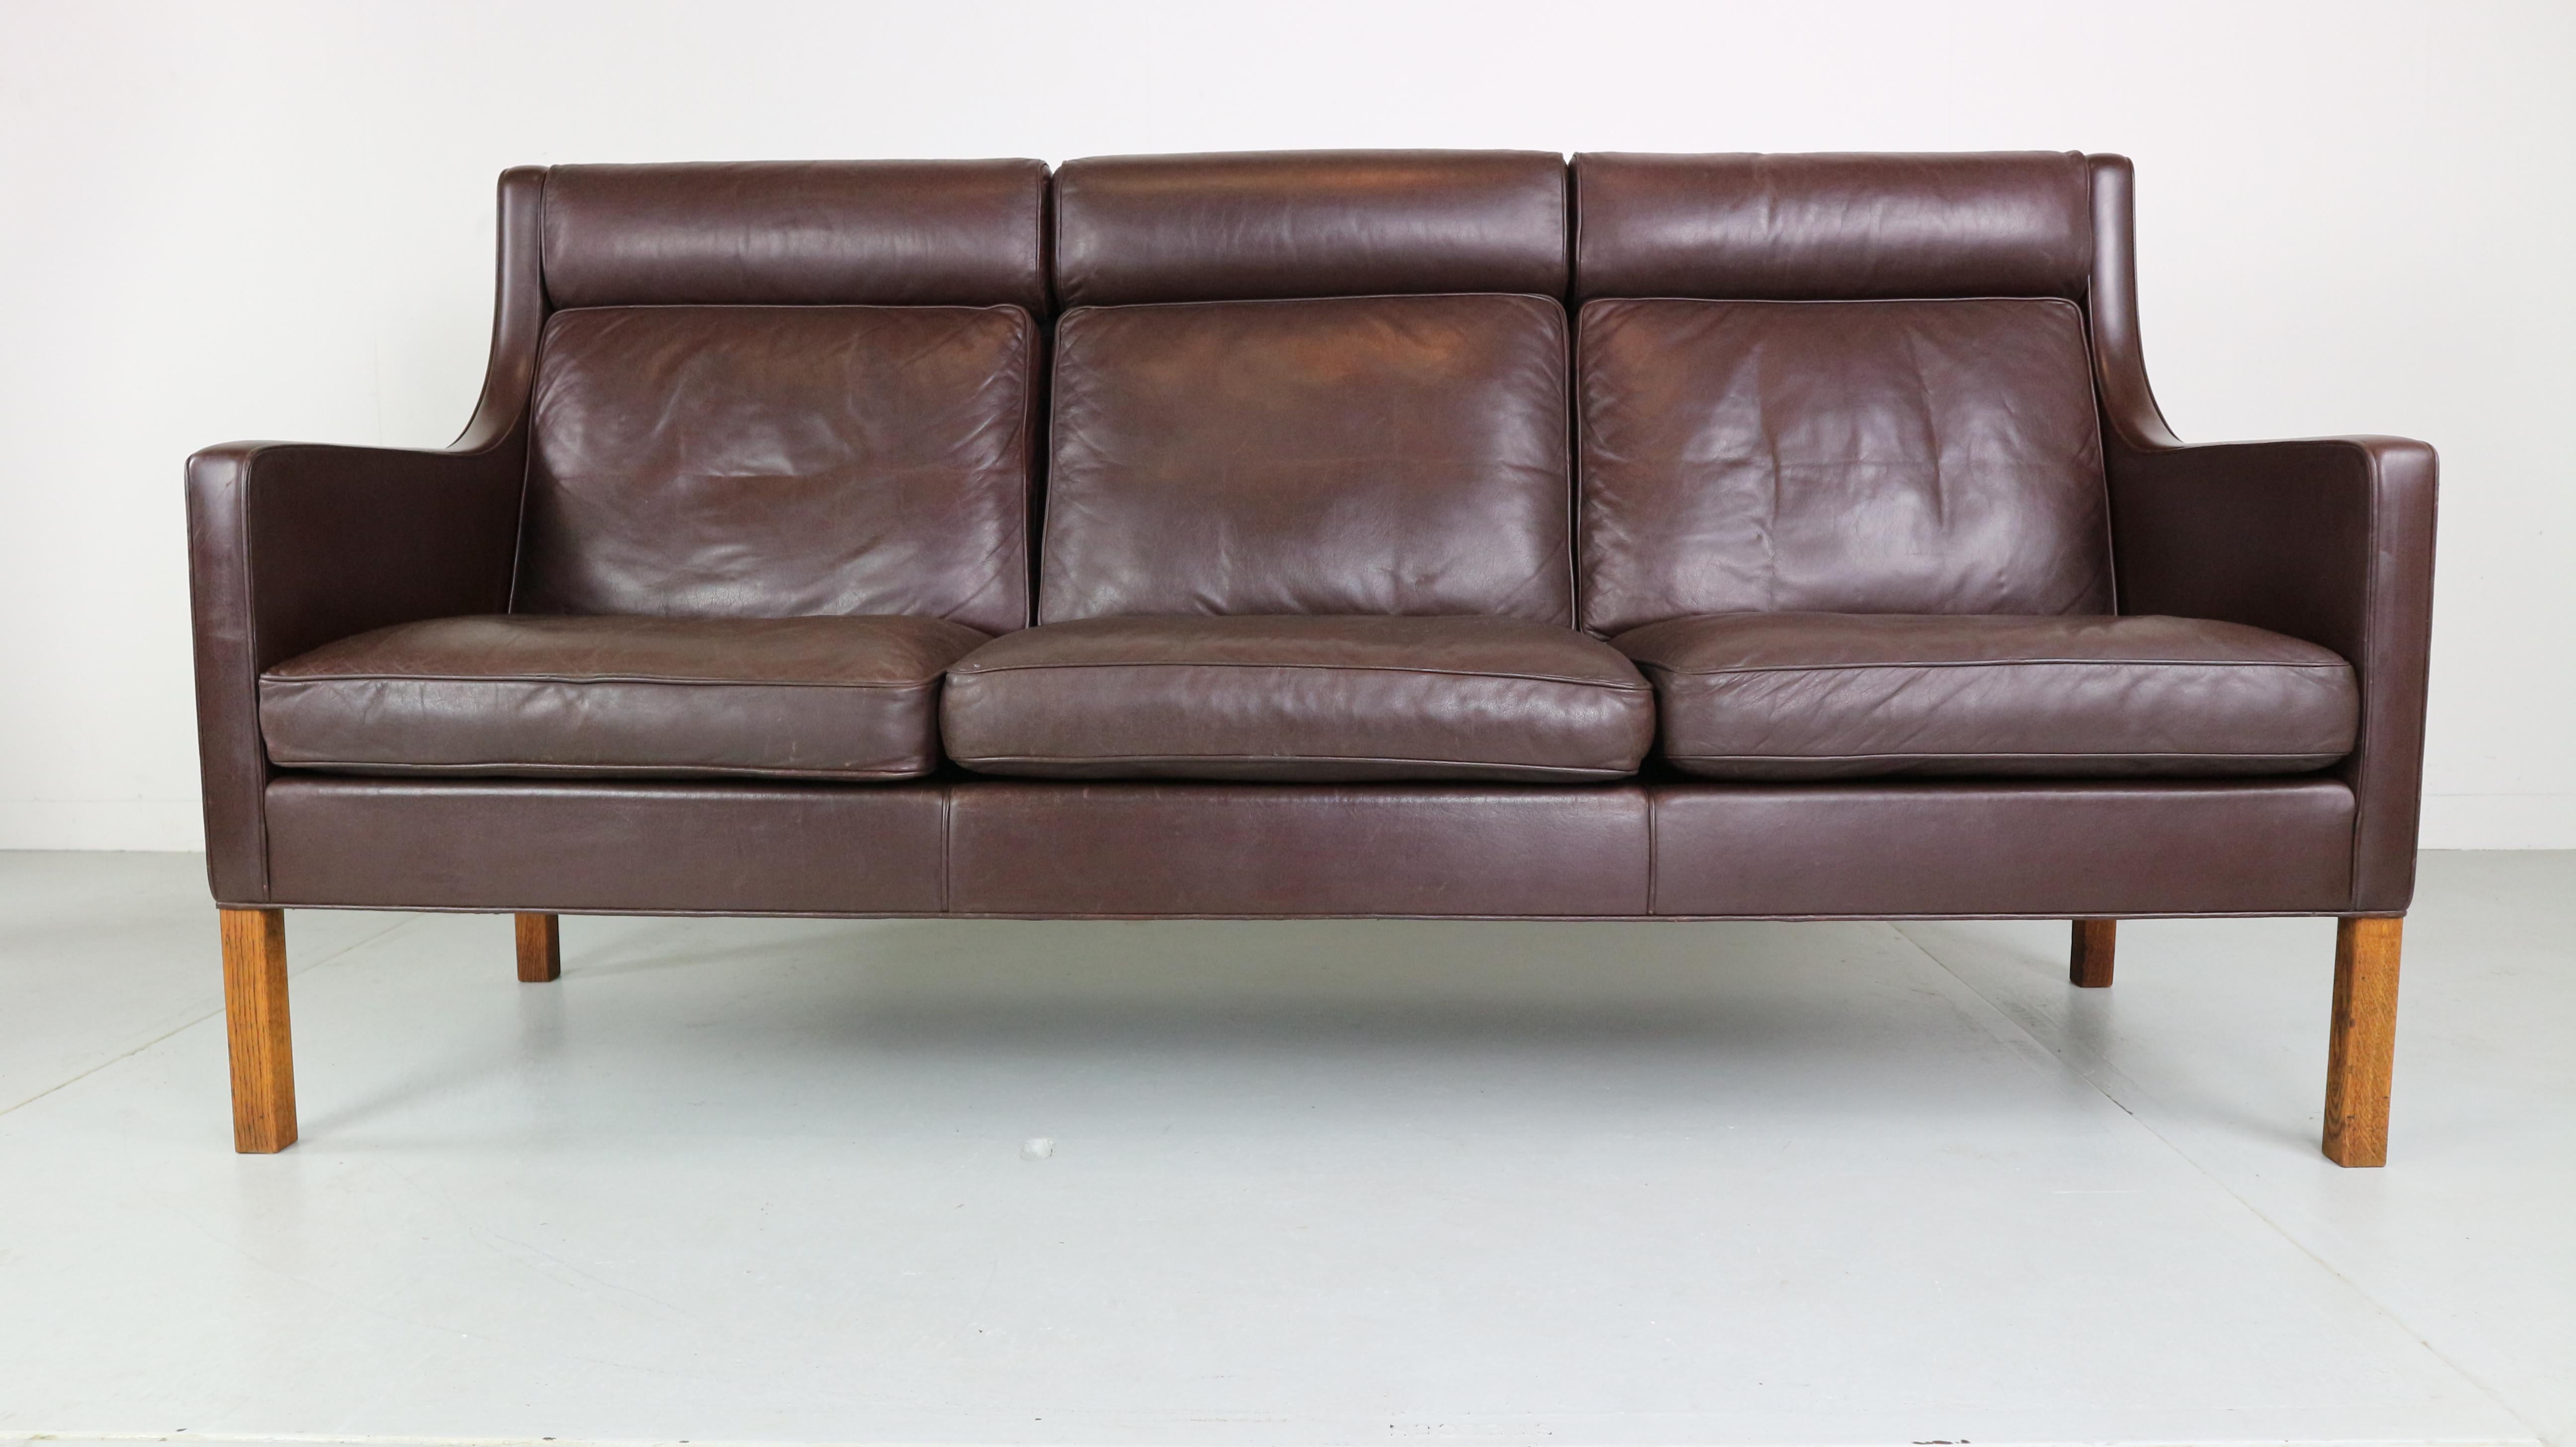 2433 model deep-brown three-seat leather sofa on the solid oak legs was designed by Børge Mogensen in the 1960s. This high back sofa was made in the 1970s by Fredericia Furniture in Denmark and is very comfortable, with the cushions remaining in a